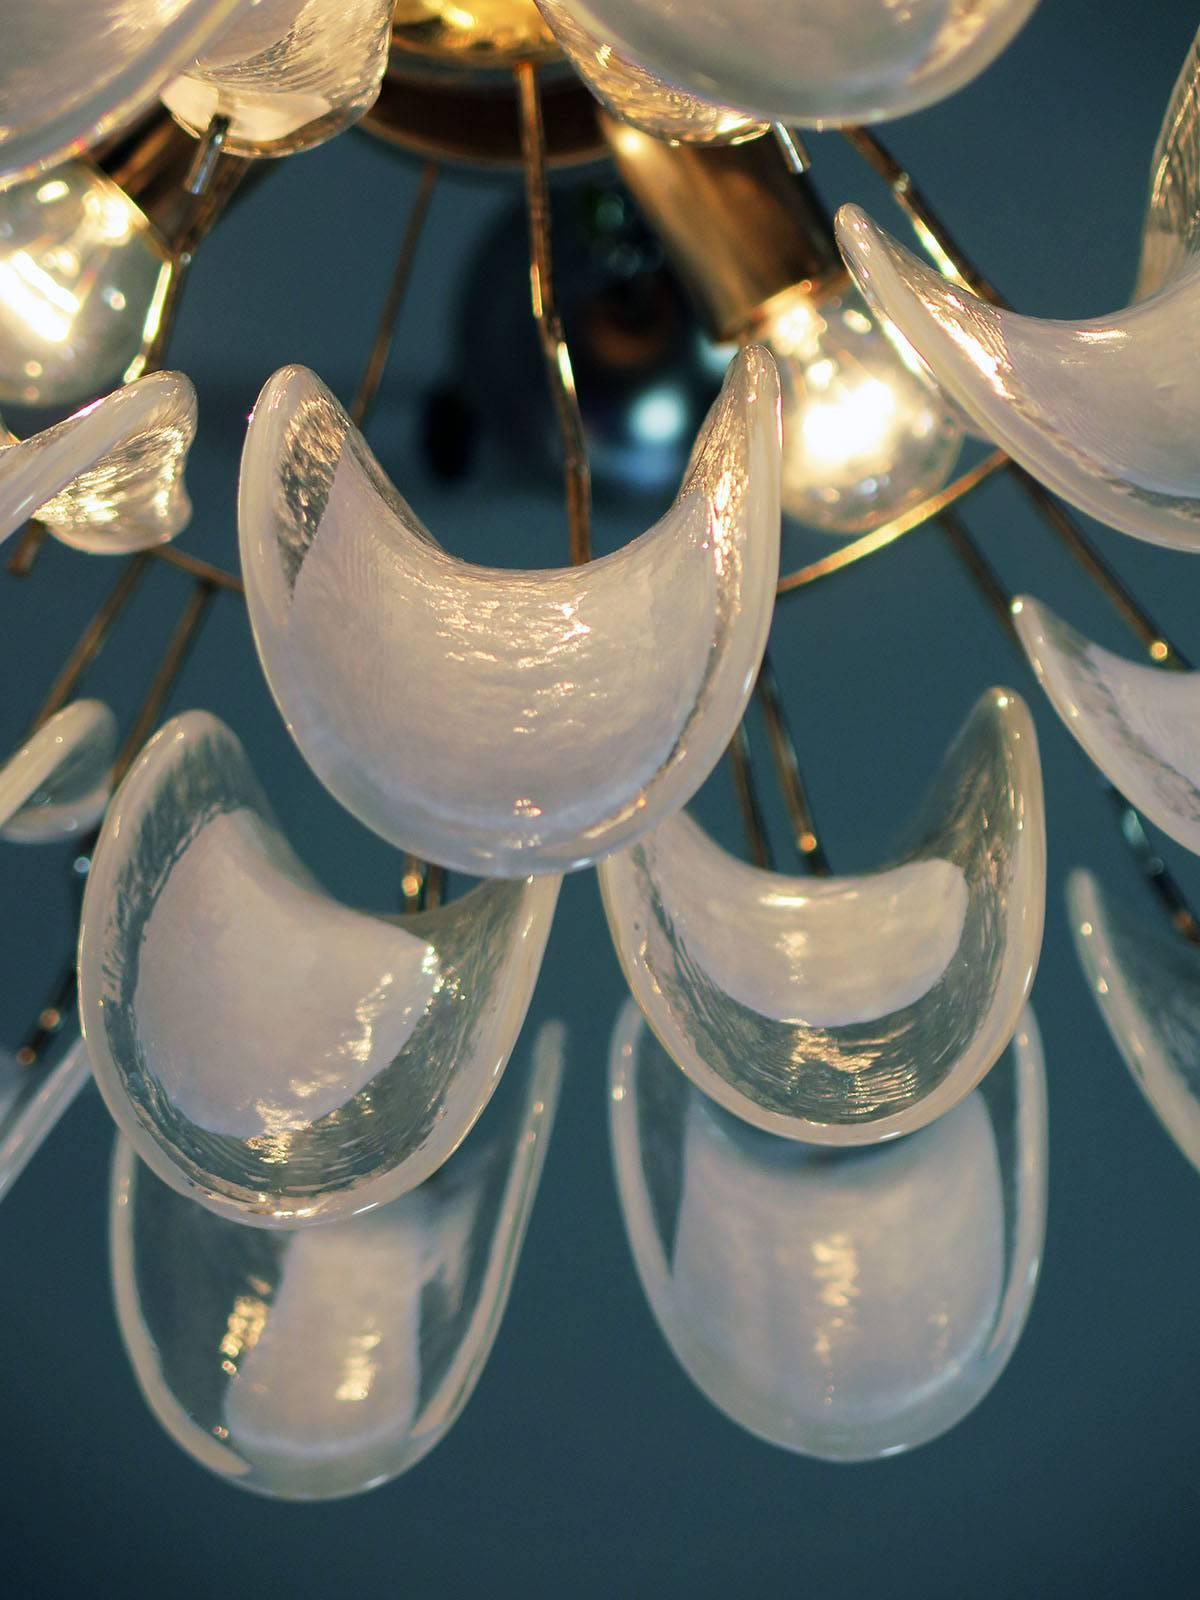 Pair of Huge Italian Vintage Murano Chandelier Made by 52 Glass Petals, 1970s (Metall)